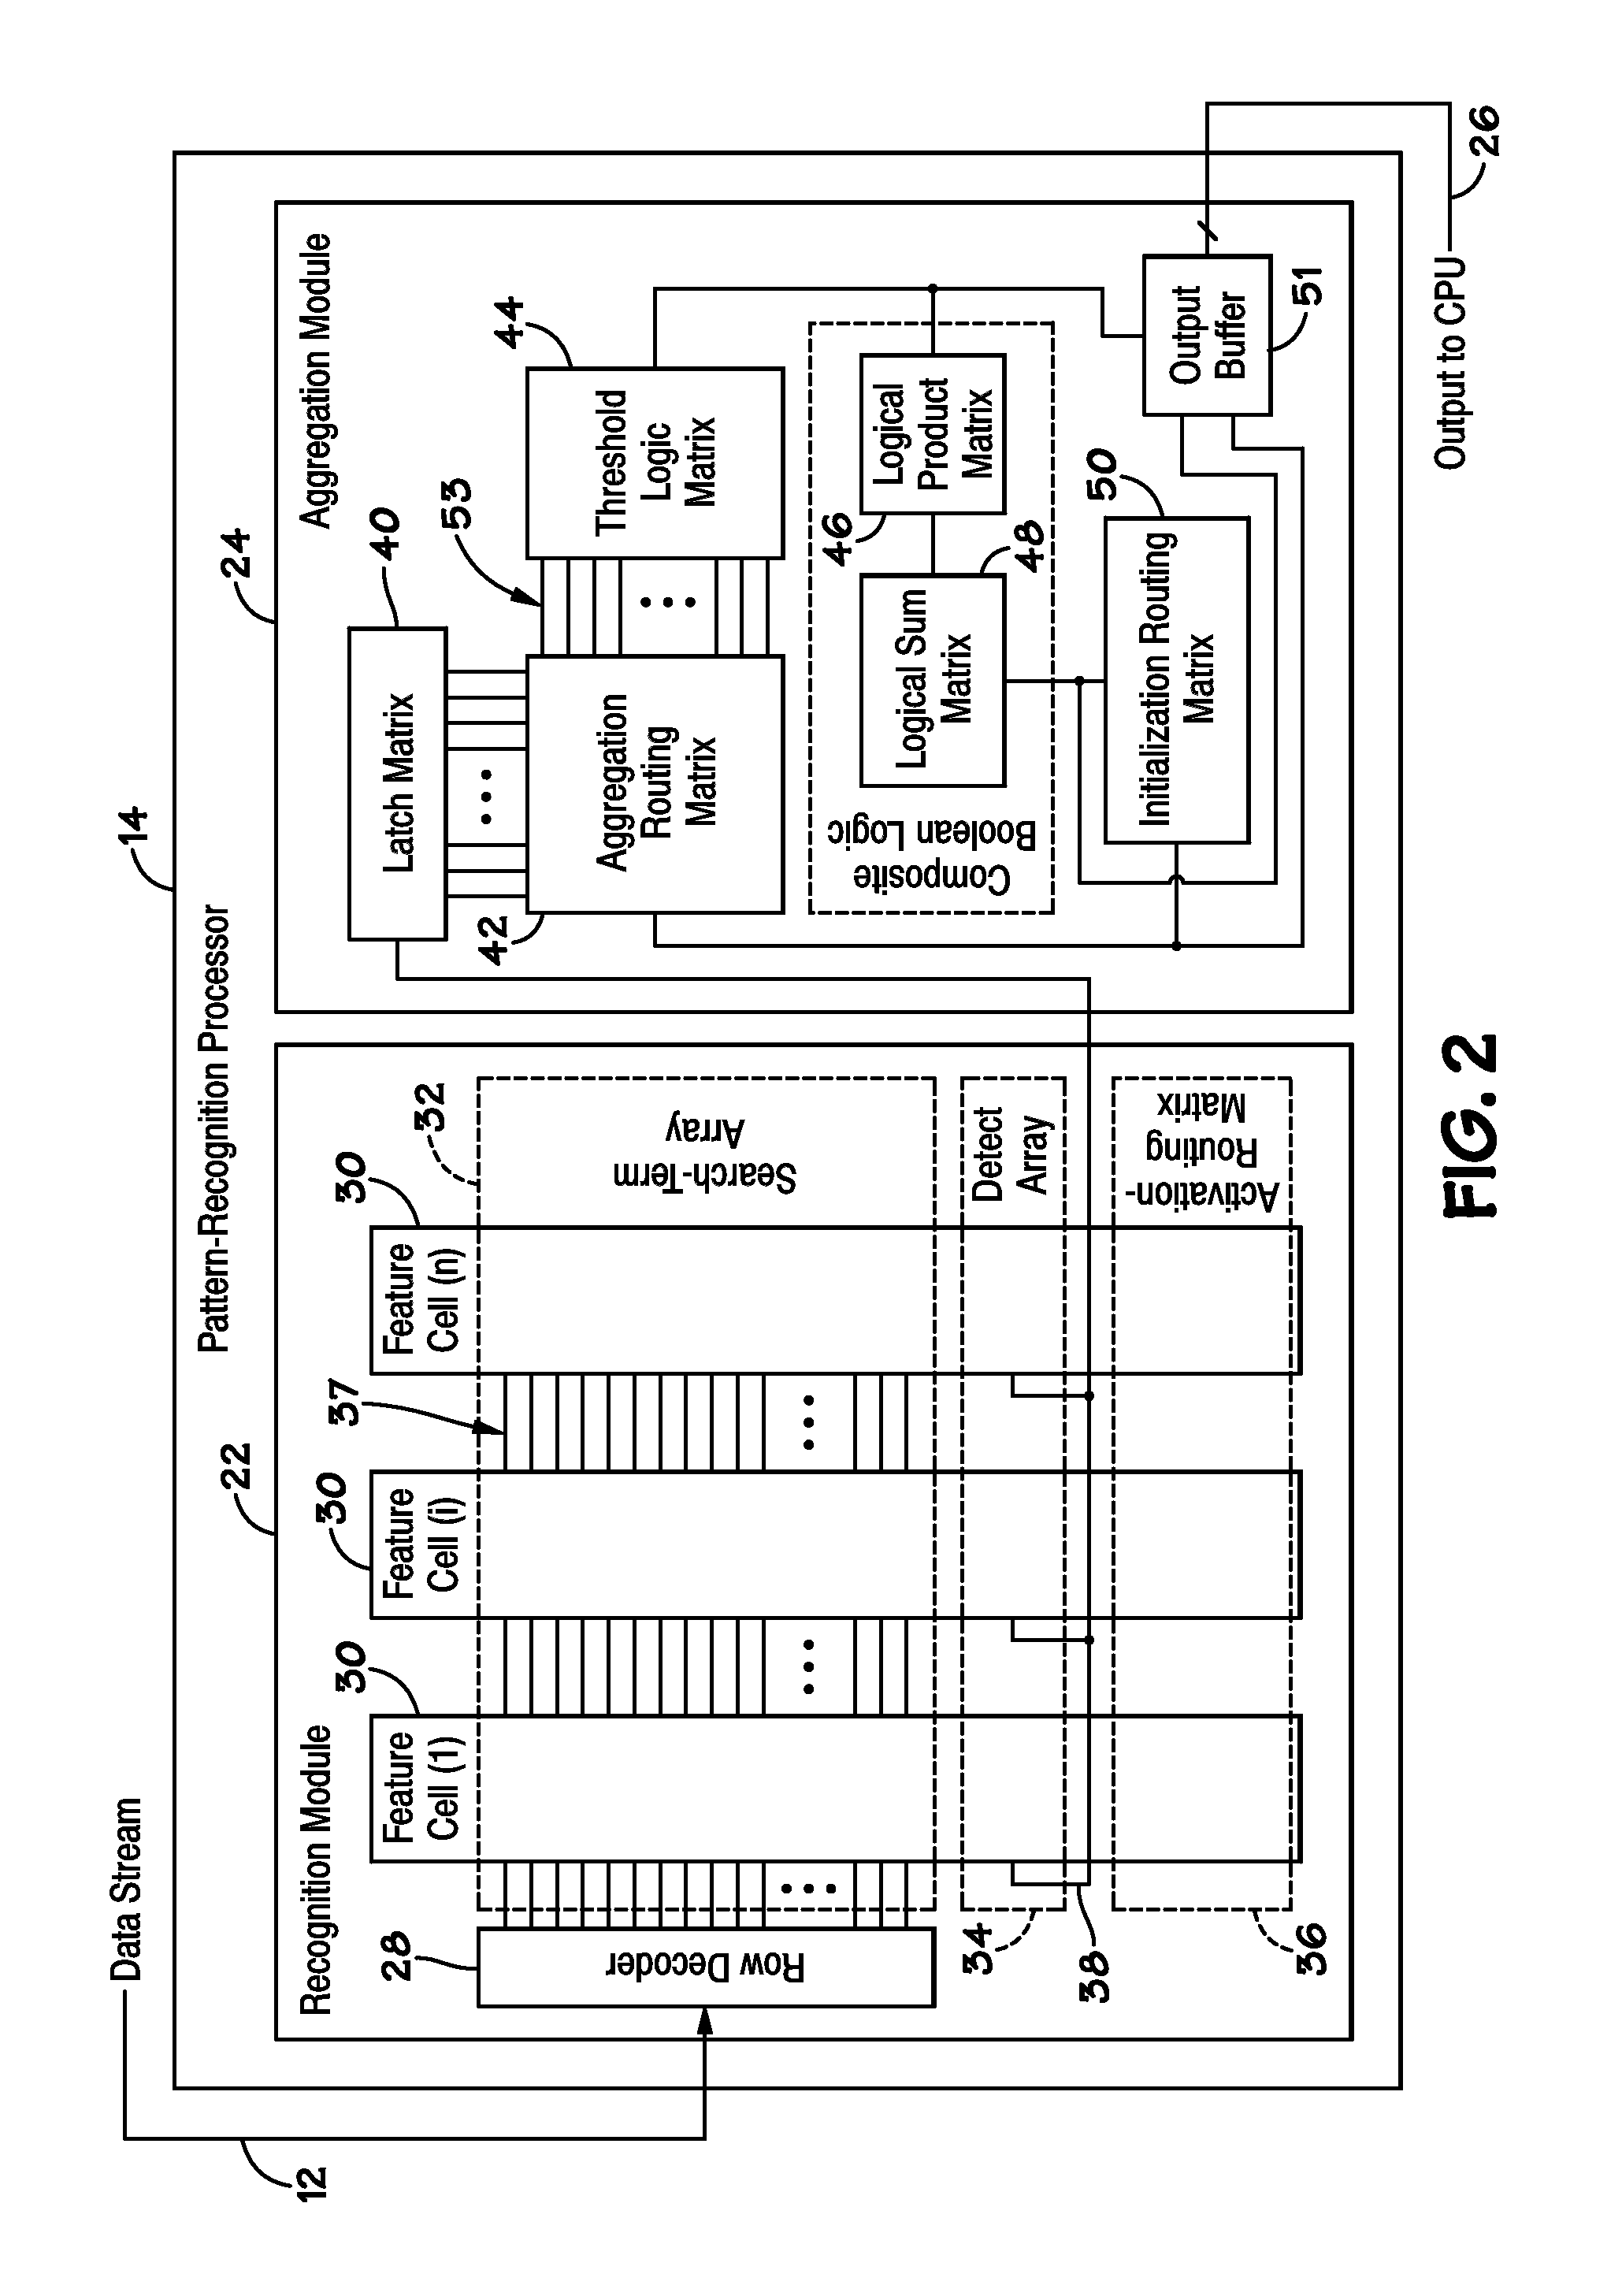 Methods and apparatuses for reducing power consumption in a pattern recognition processor